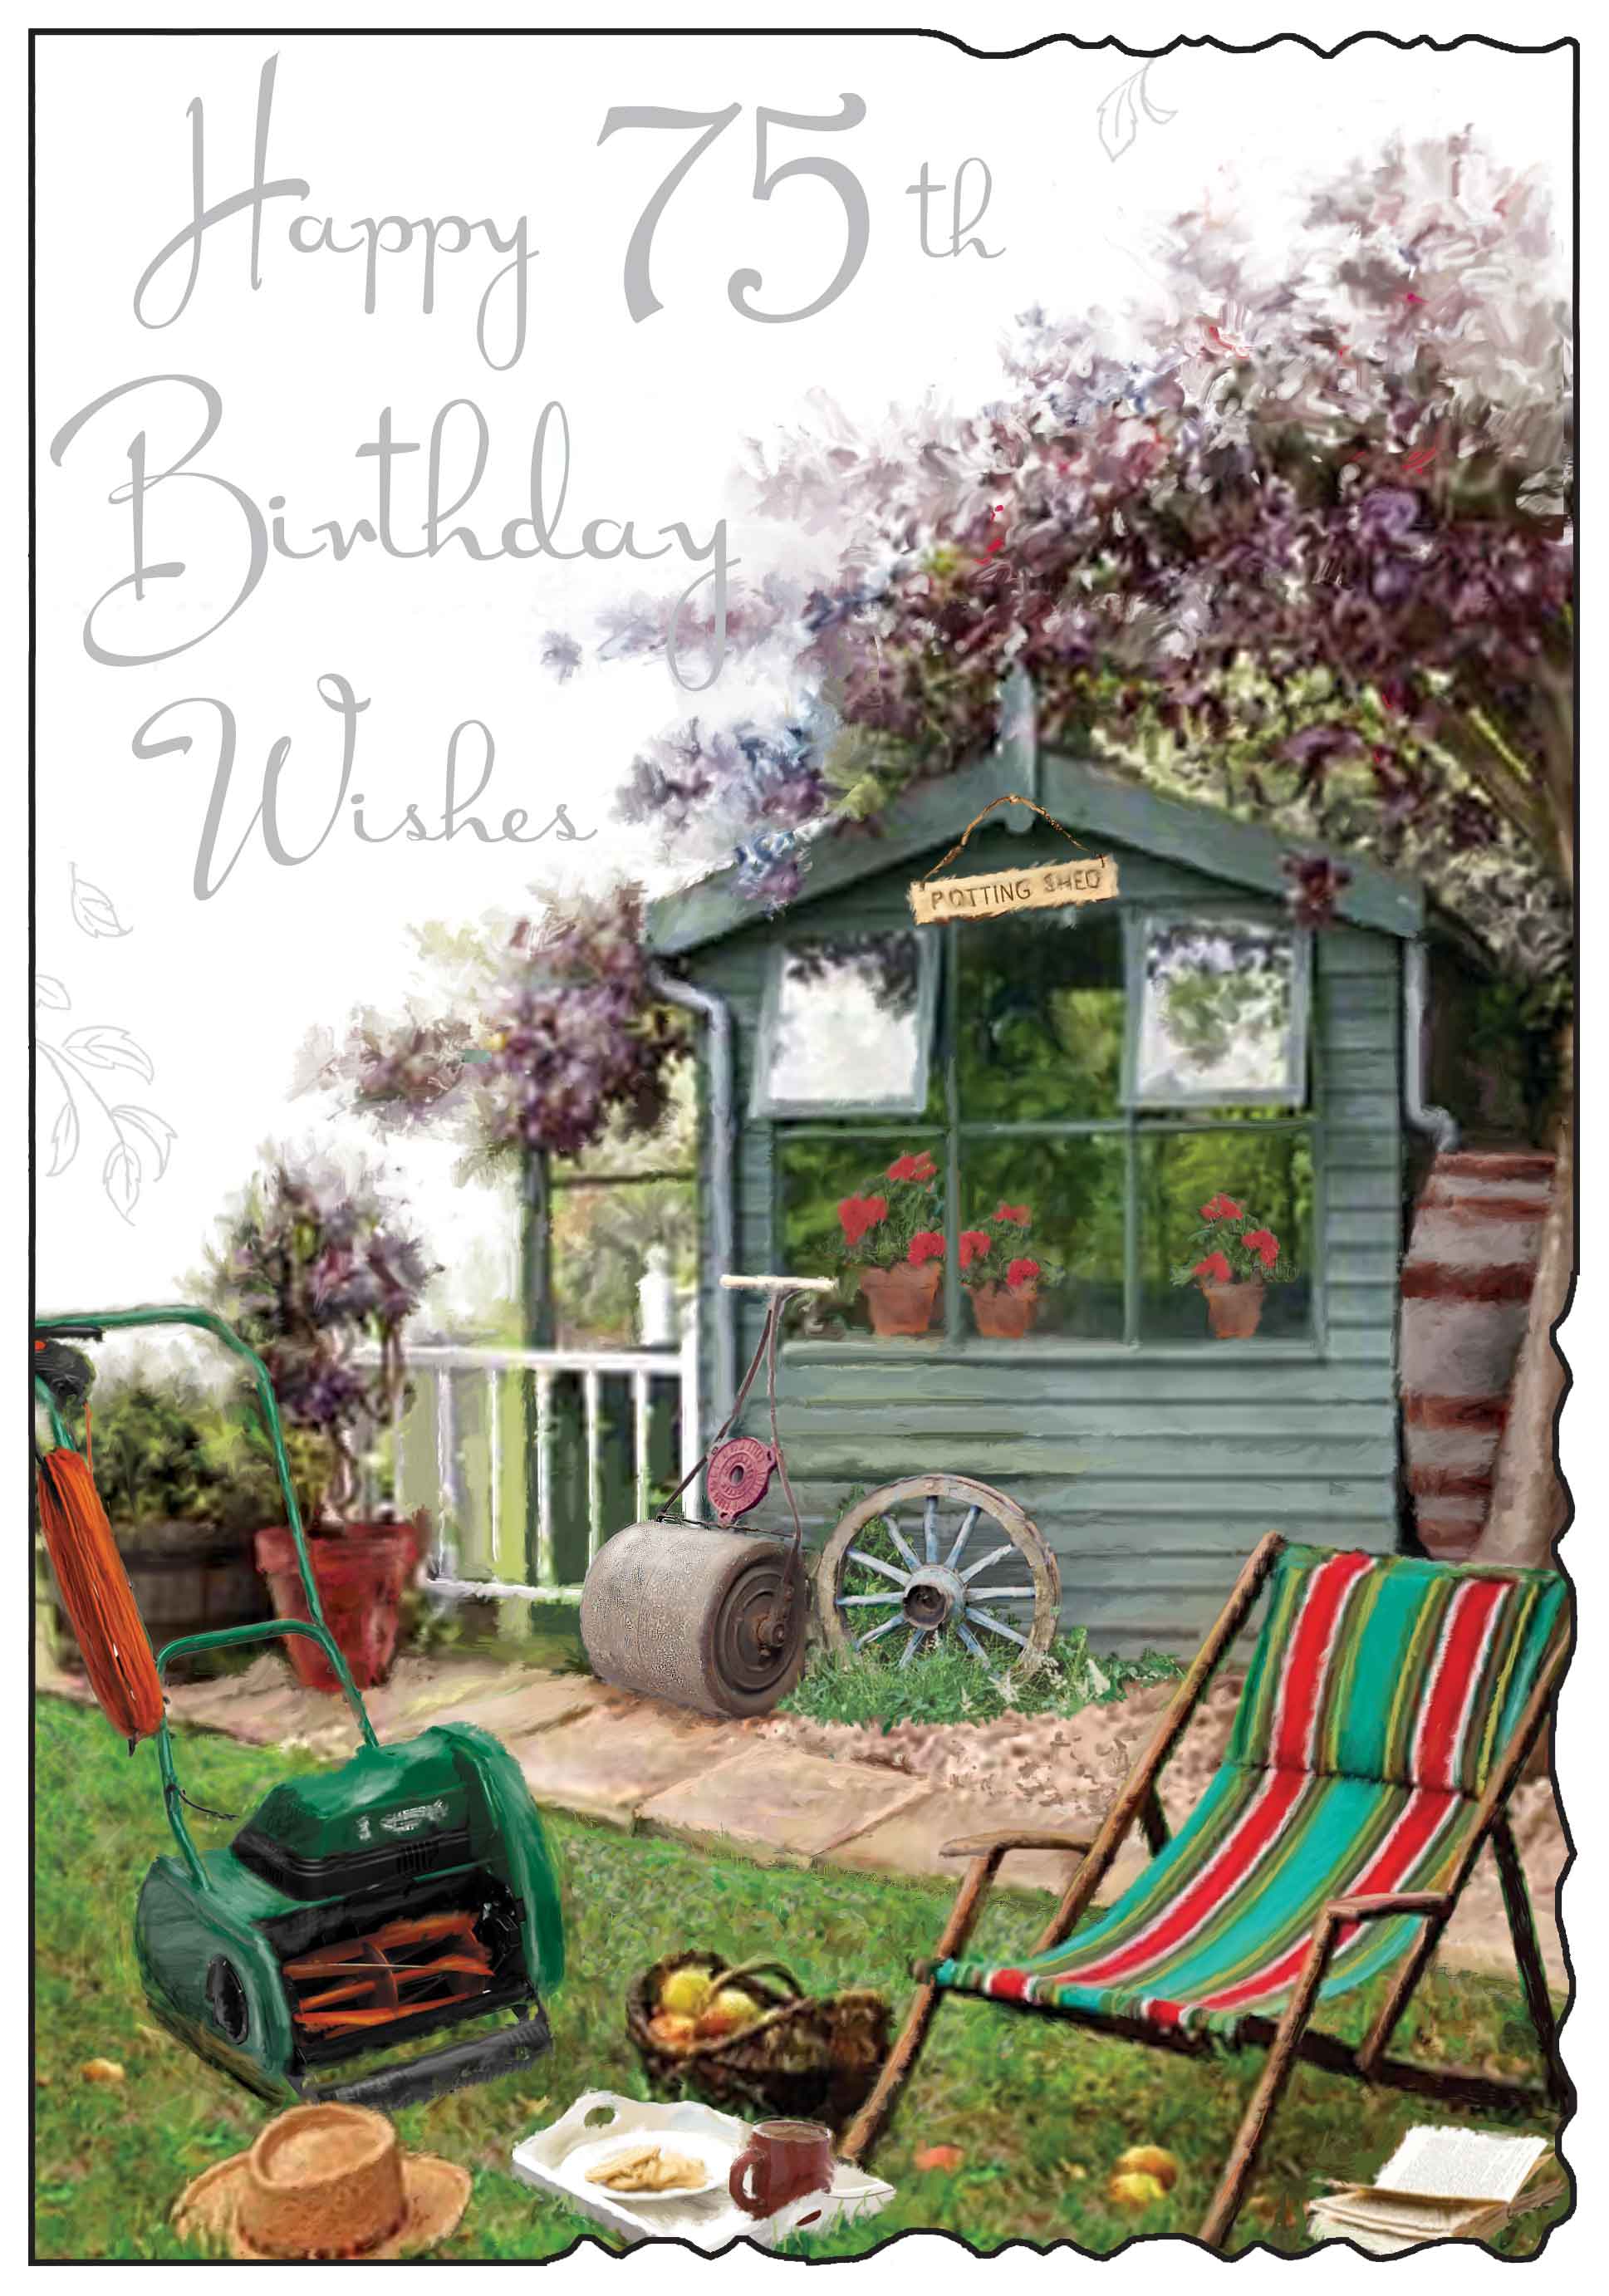 75th Birthday Card - Gardening Duties And Time To Relax